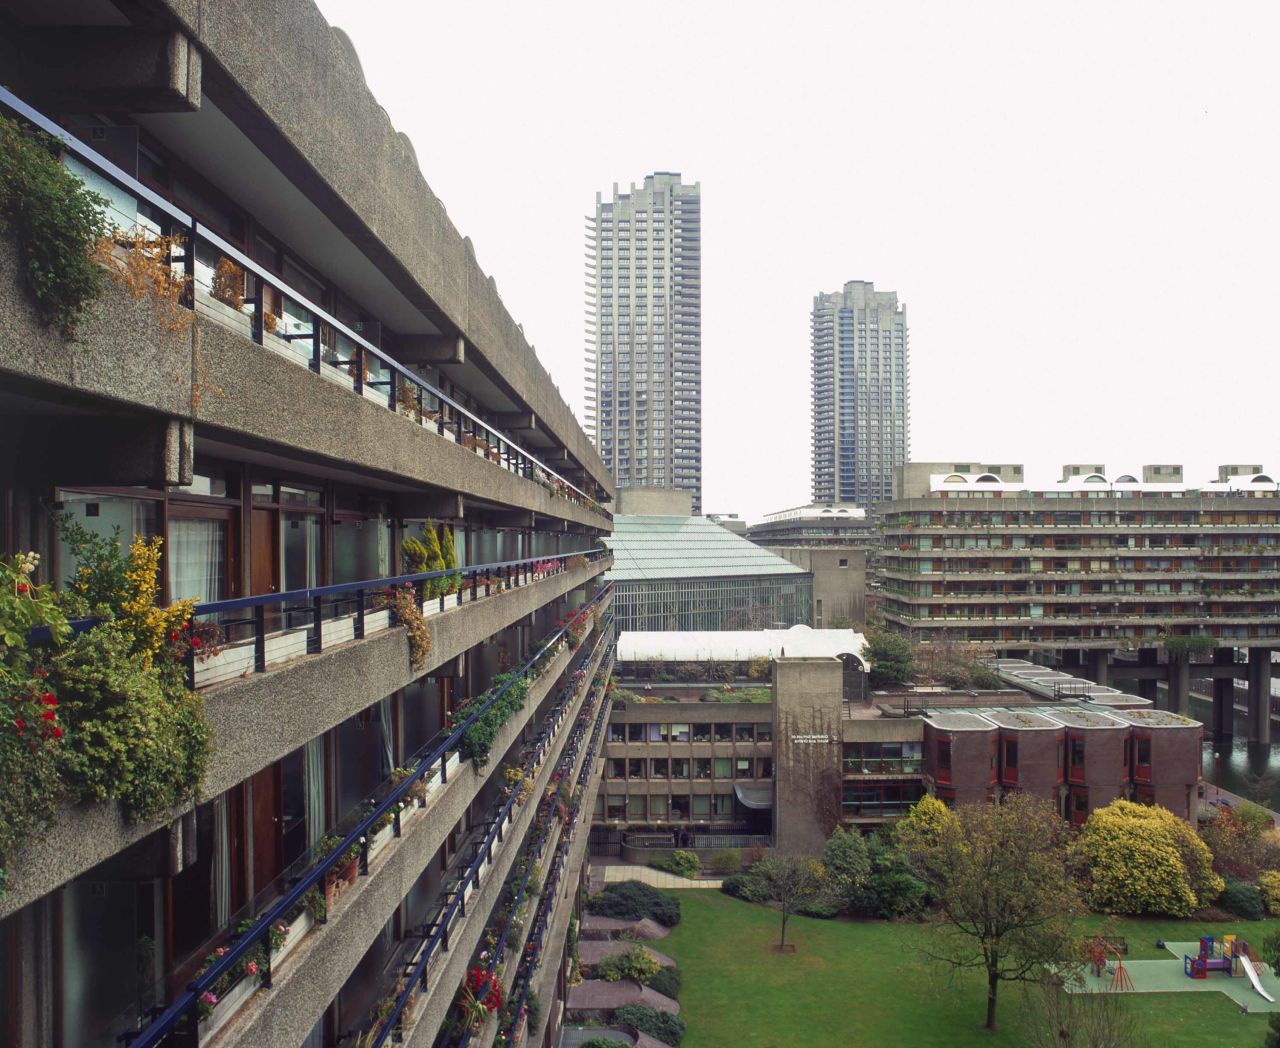 The Barbican Estate in London is an example of the social housing that became increasingly common early in the Queen's reign.